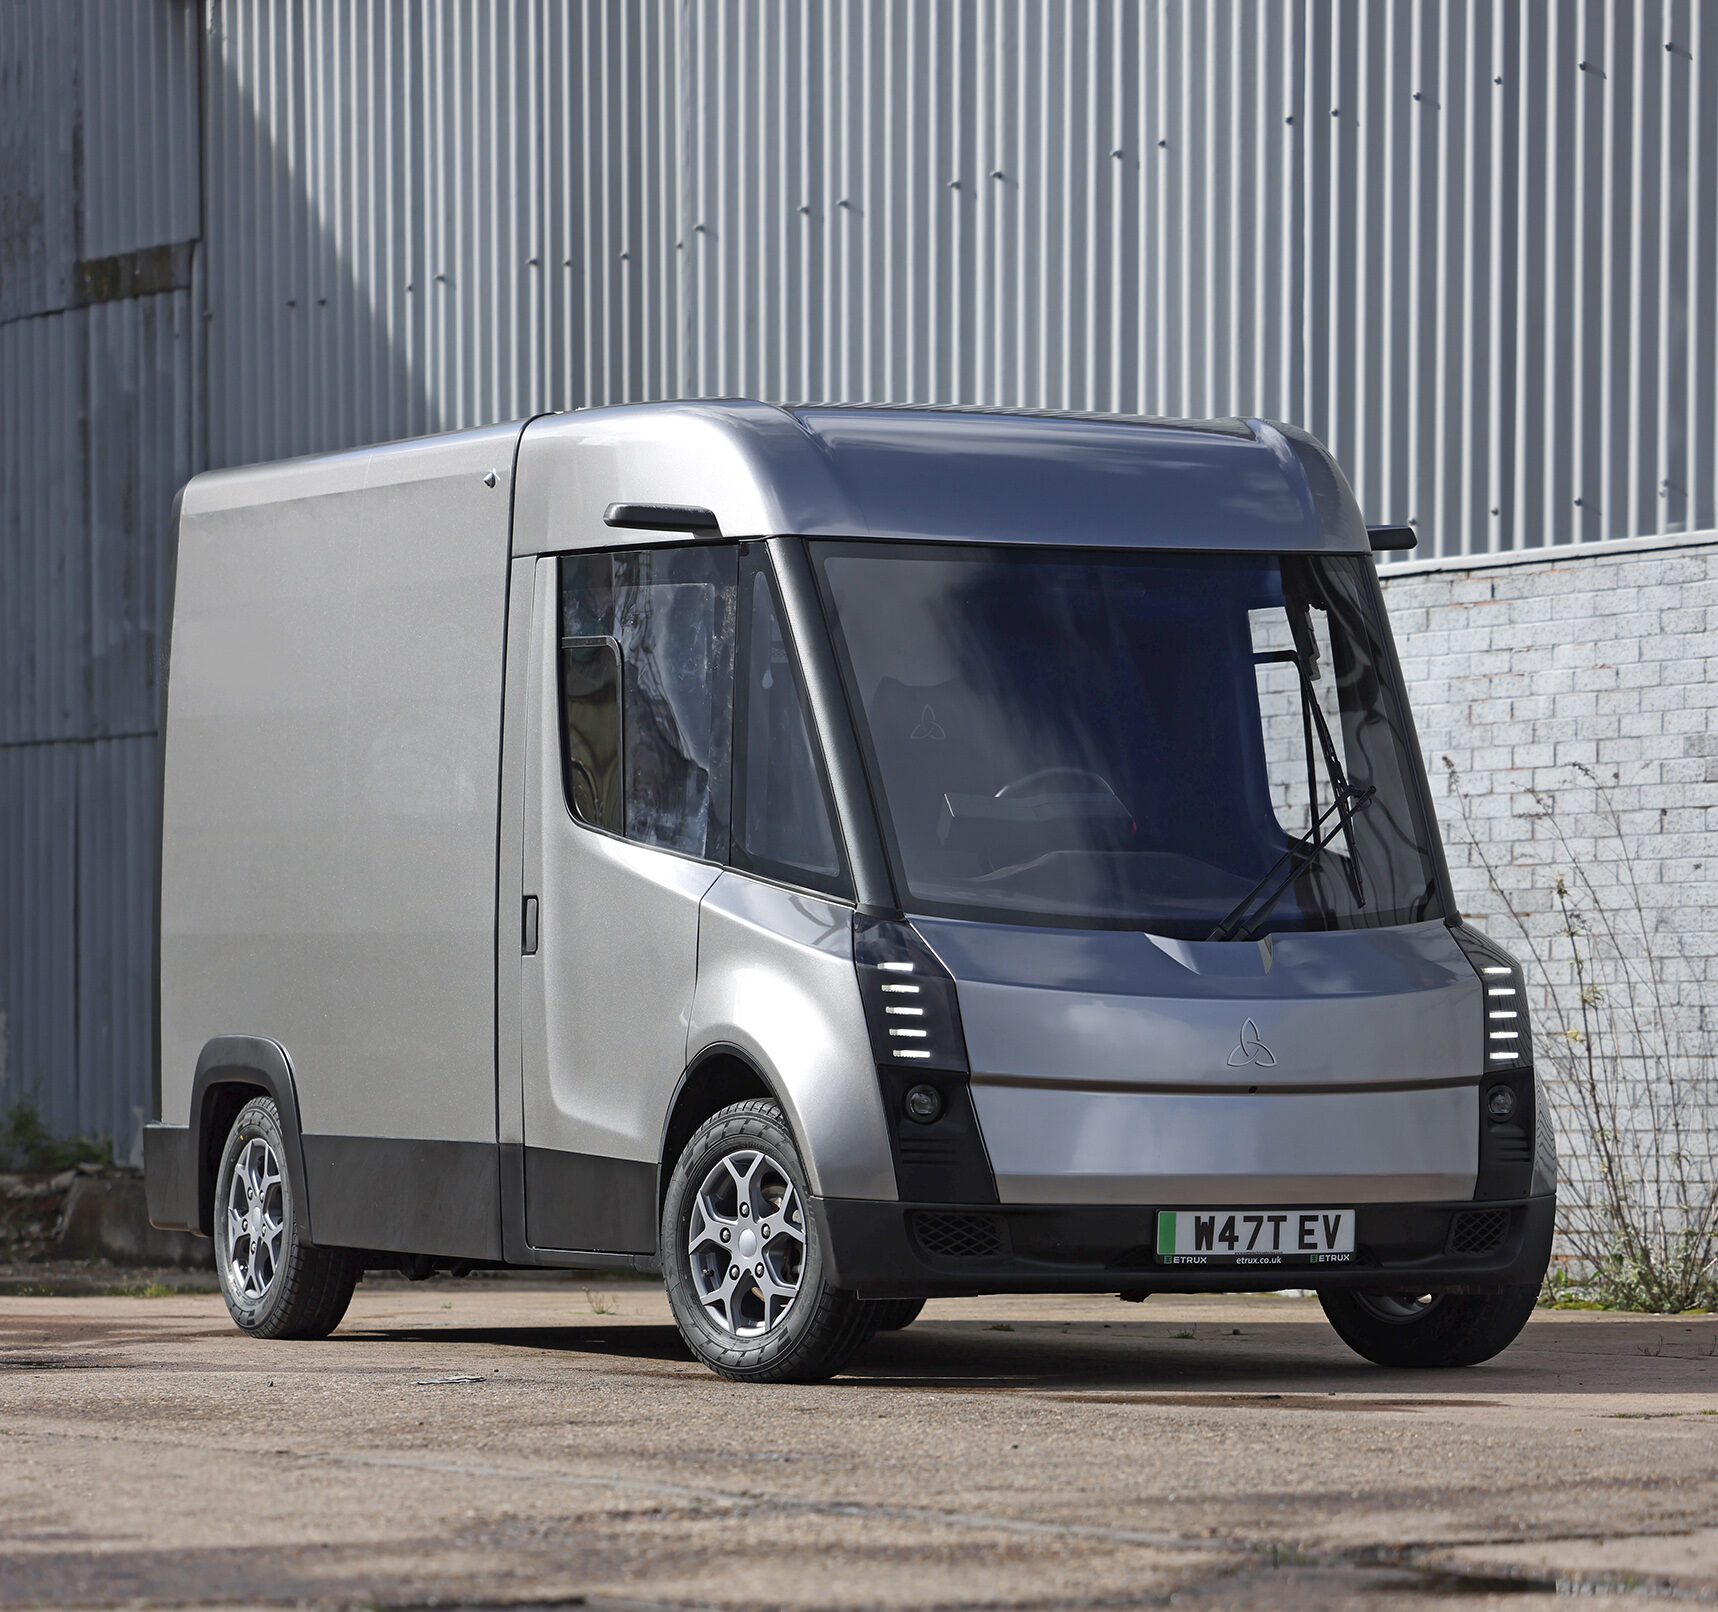 WEVC eCV1 Electric Van Makes Global Debut At UK Commercial Vehicle Show